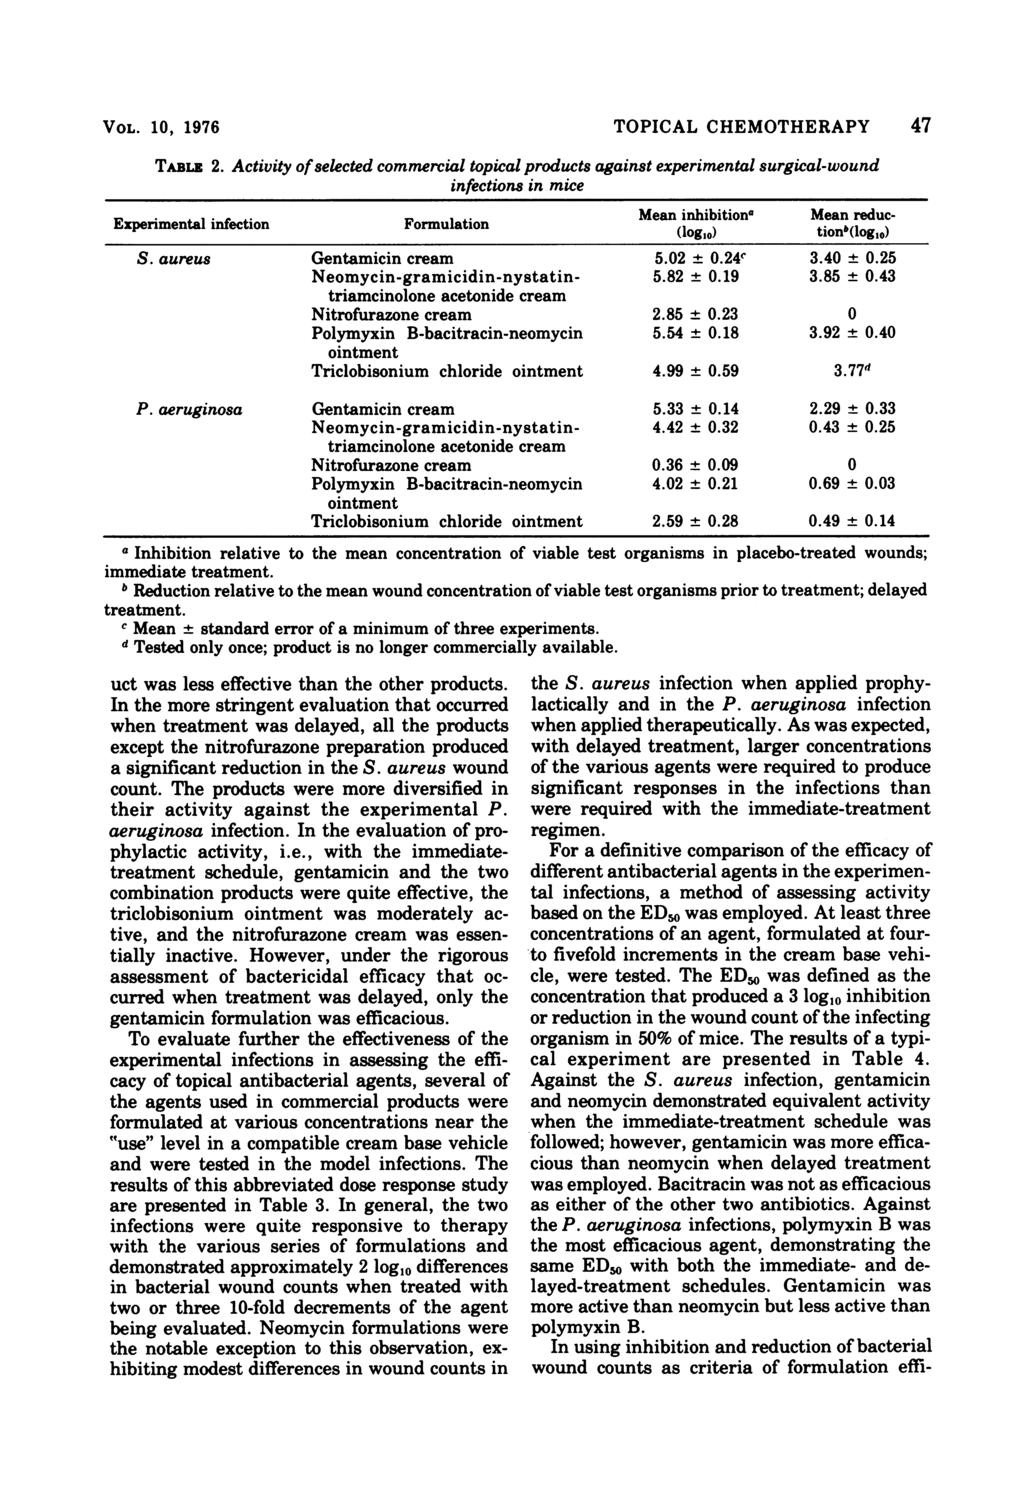 VOL. 10, 1976 TOPICAL CHEMOTHERAPY 47 TABLz 2.